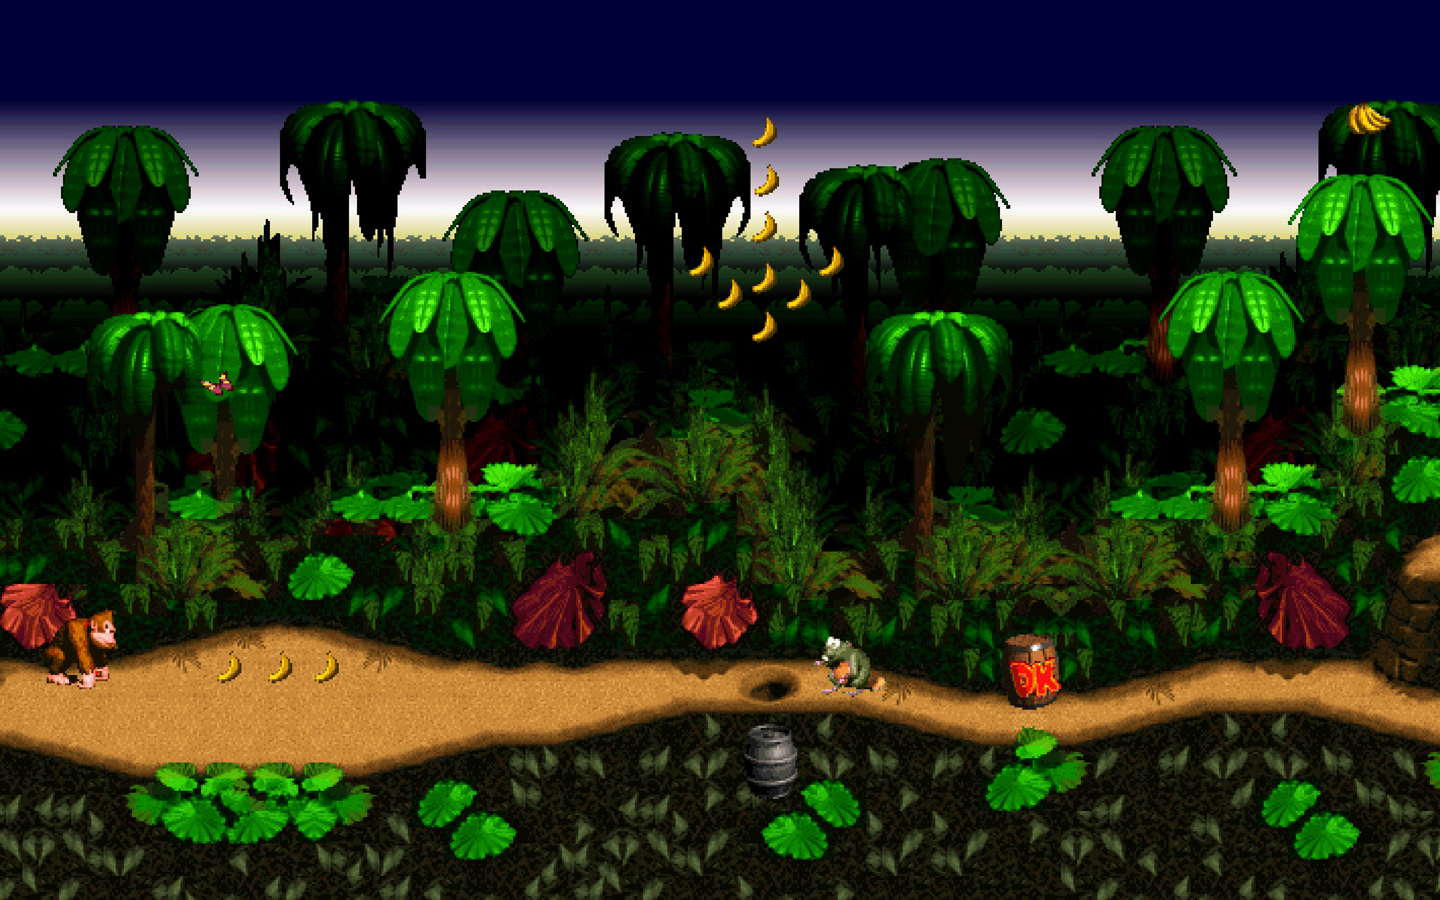 Donkey Kong Country Picture